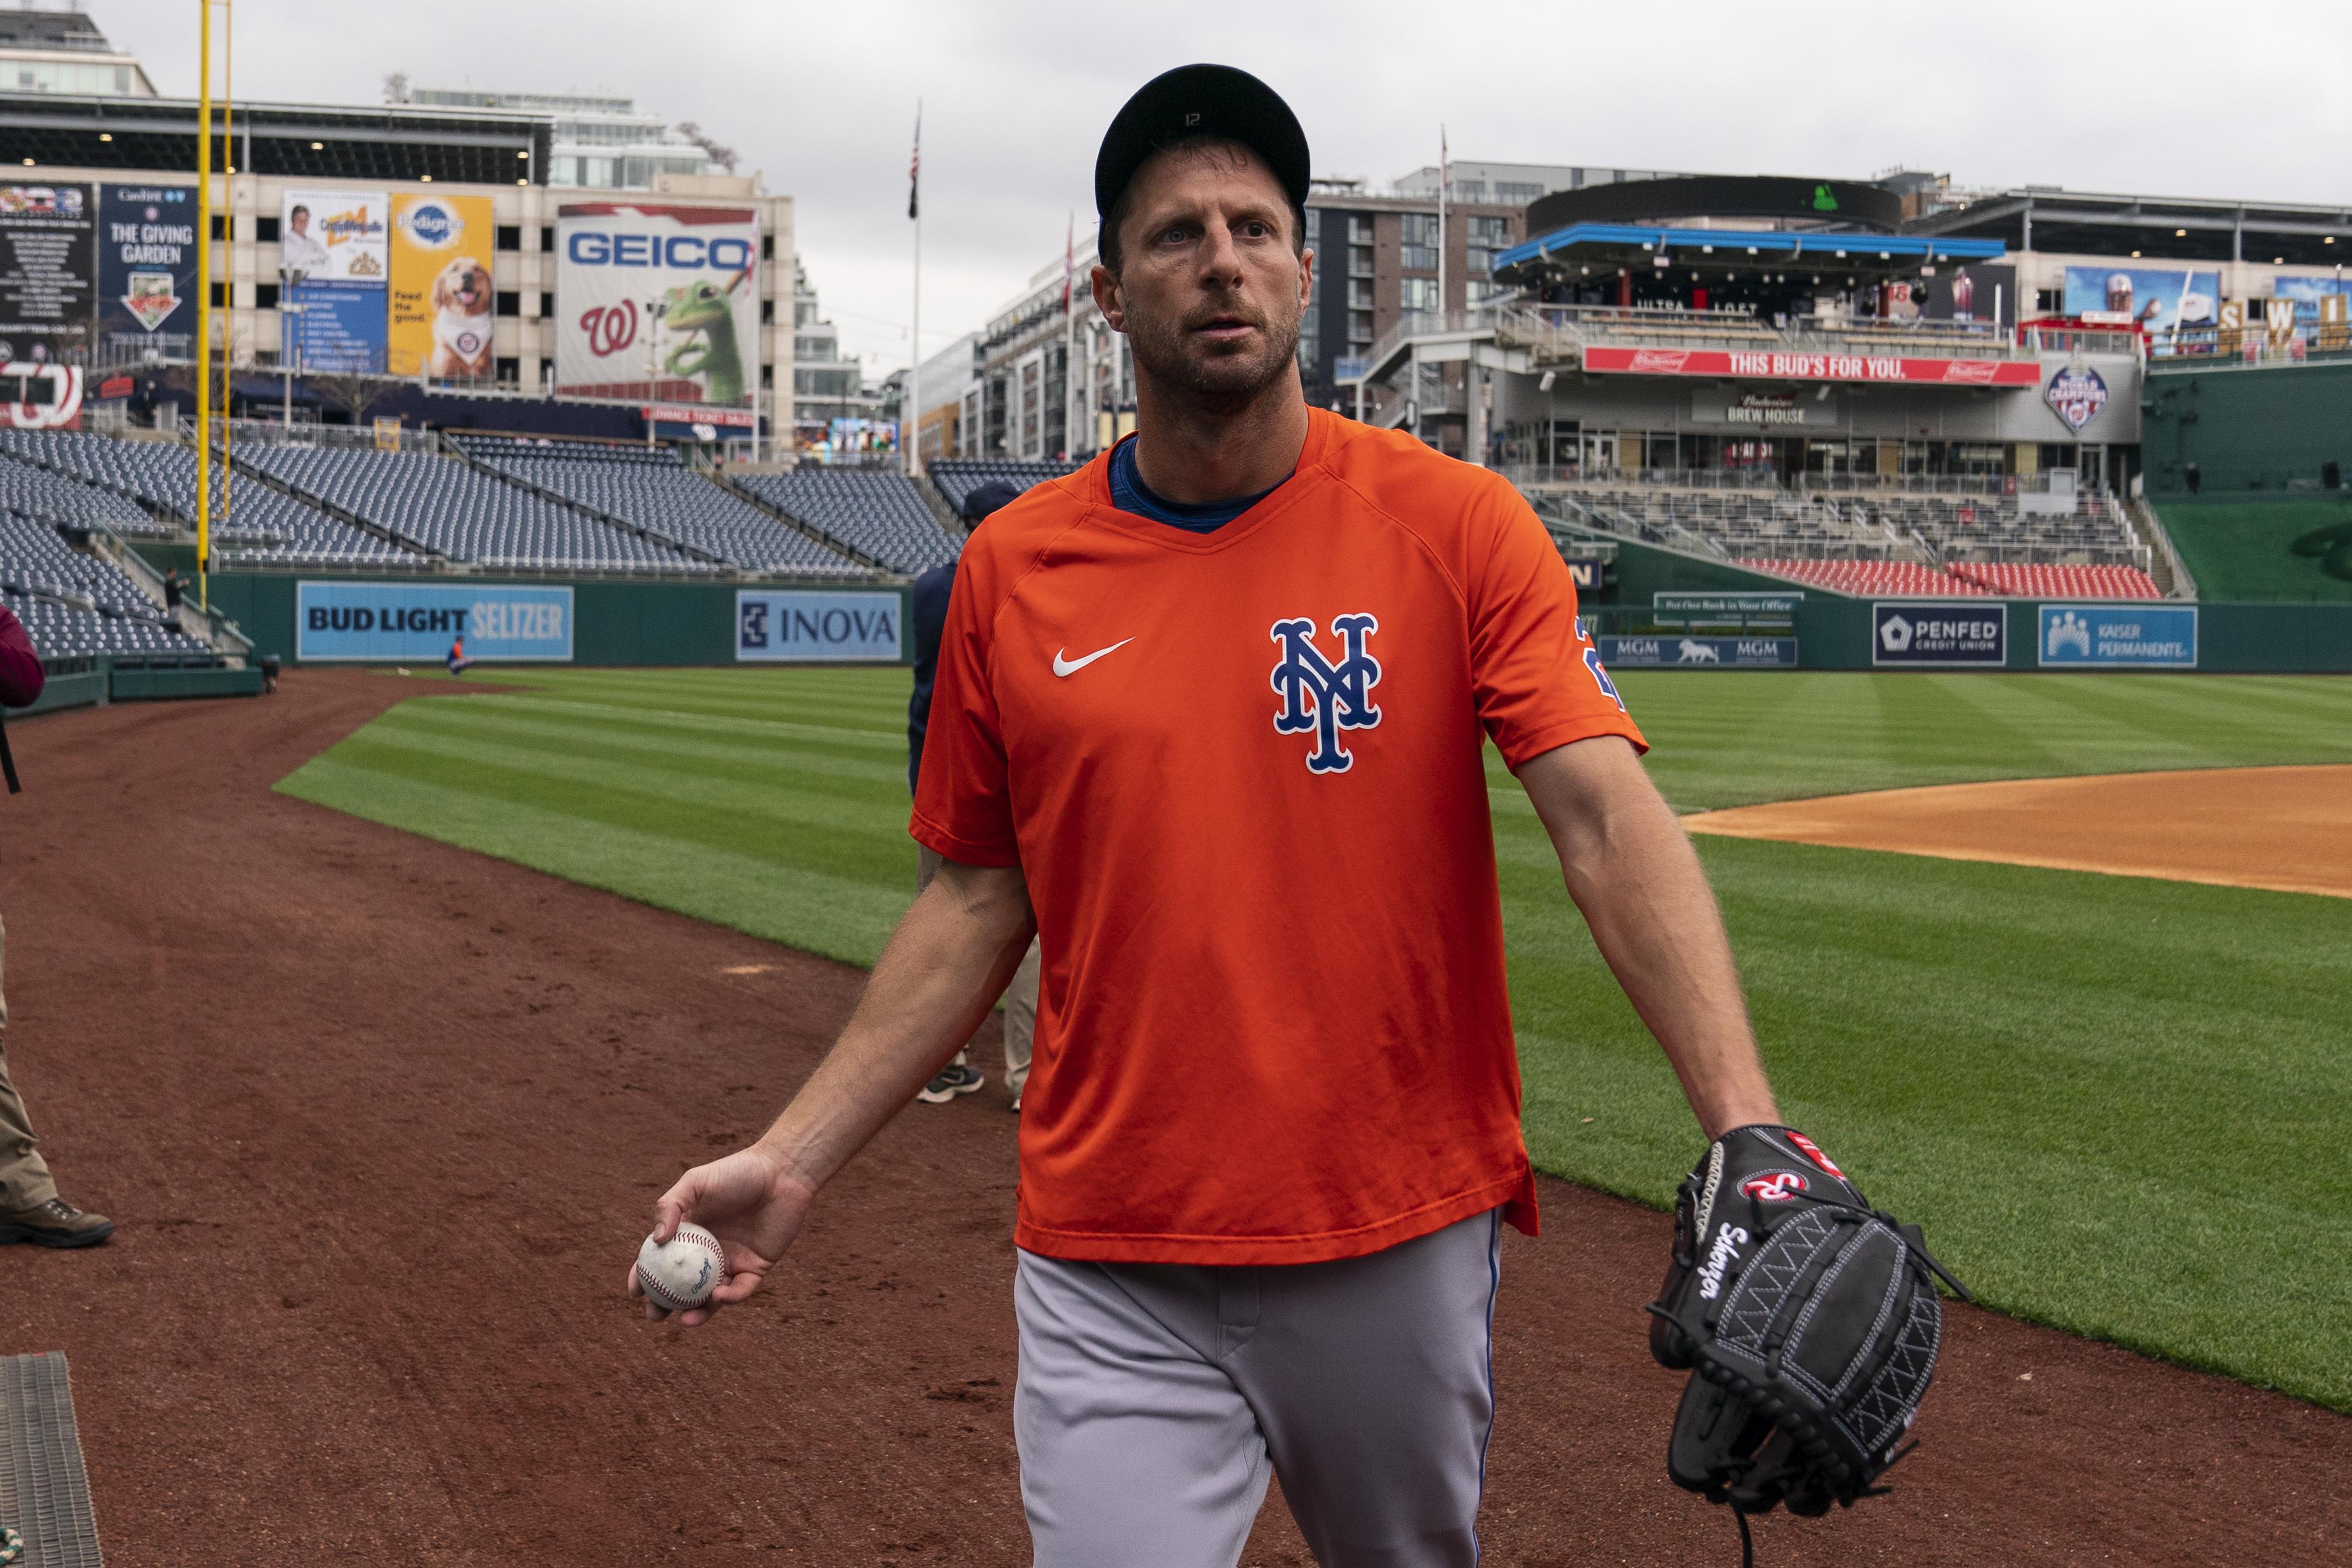 Mets' Max Scherzer Opening Day in question with hamstring issue